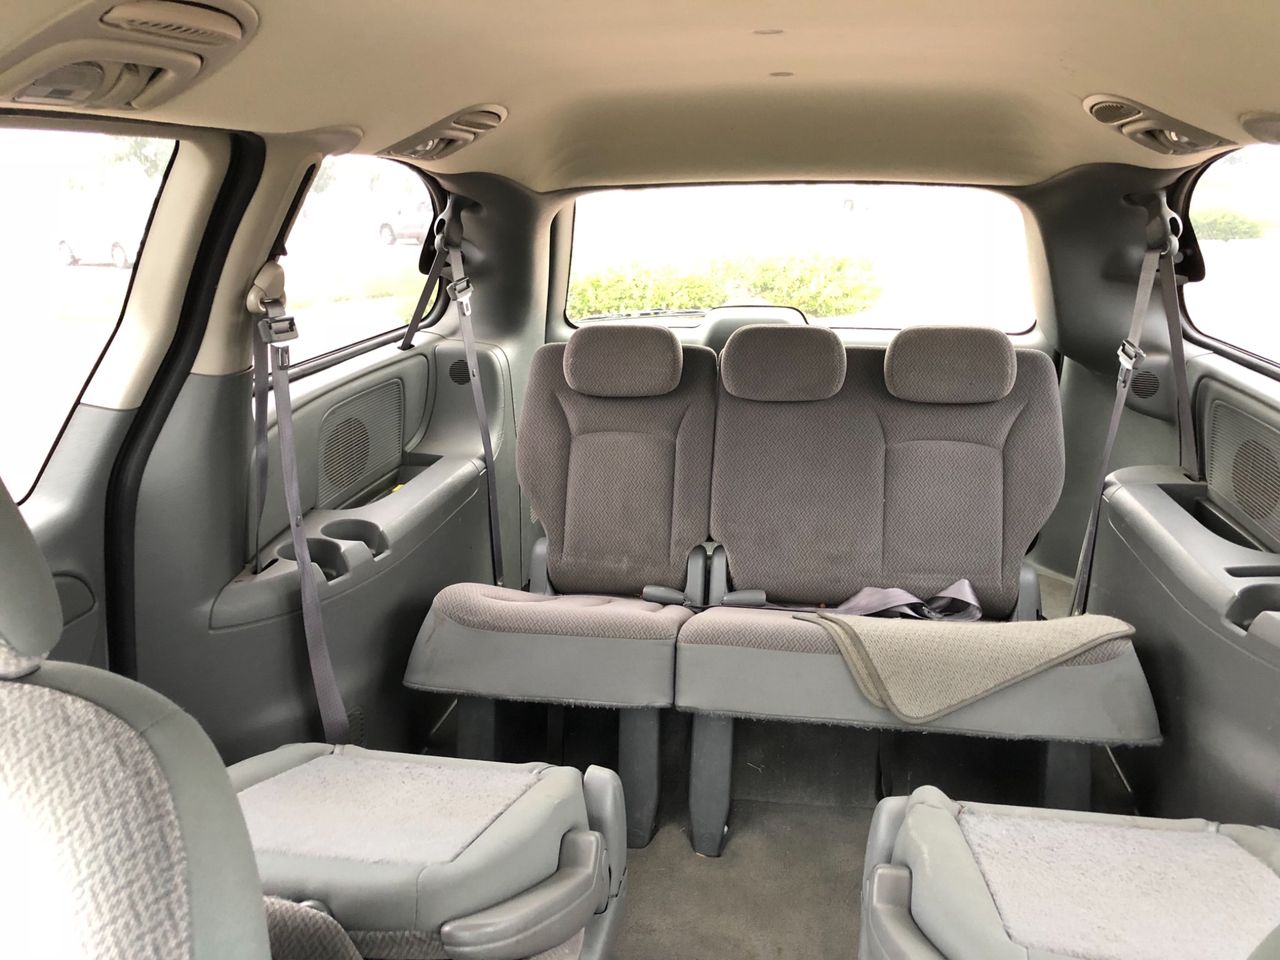 2006 Chrysler Town and Country Touring | Brandon, SD, Bright Silver Metallic Clearcoat (Silver), Front Wheel